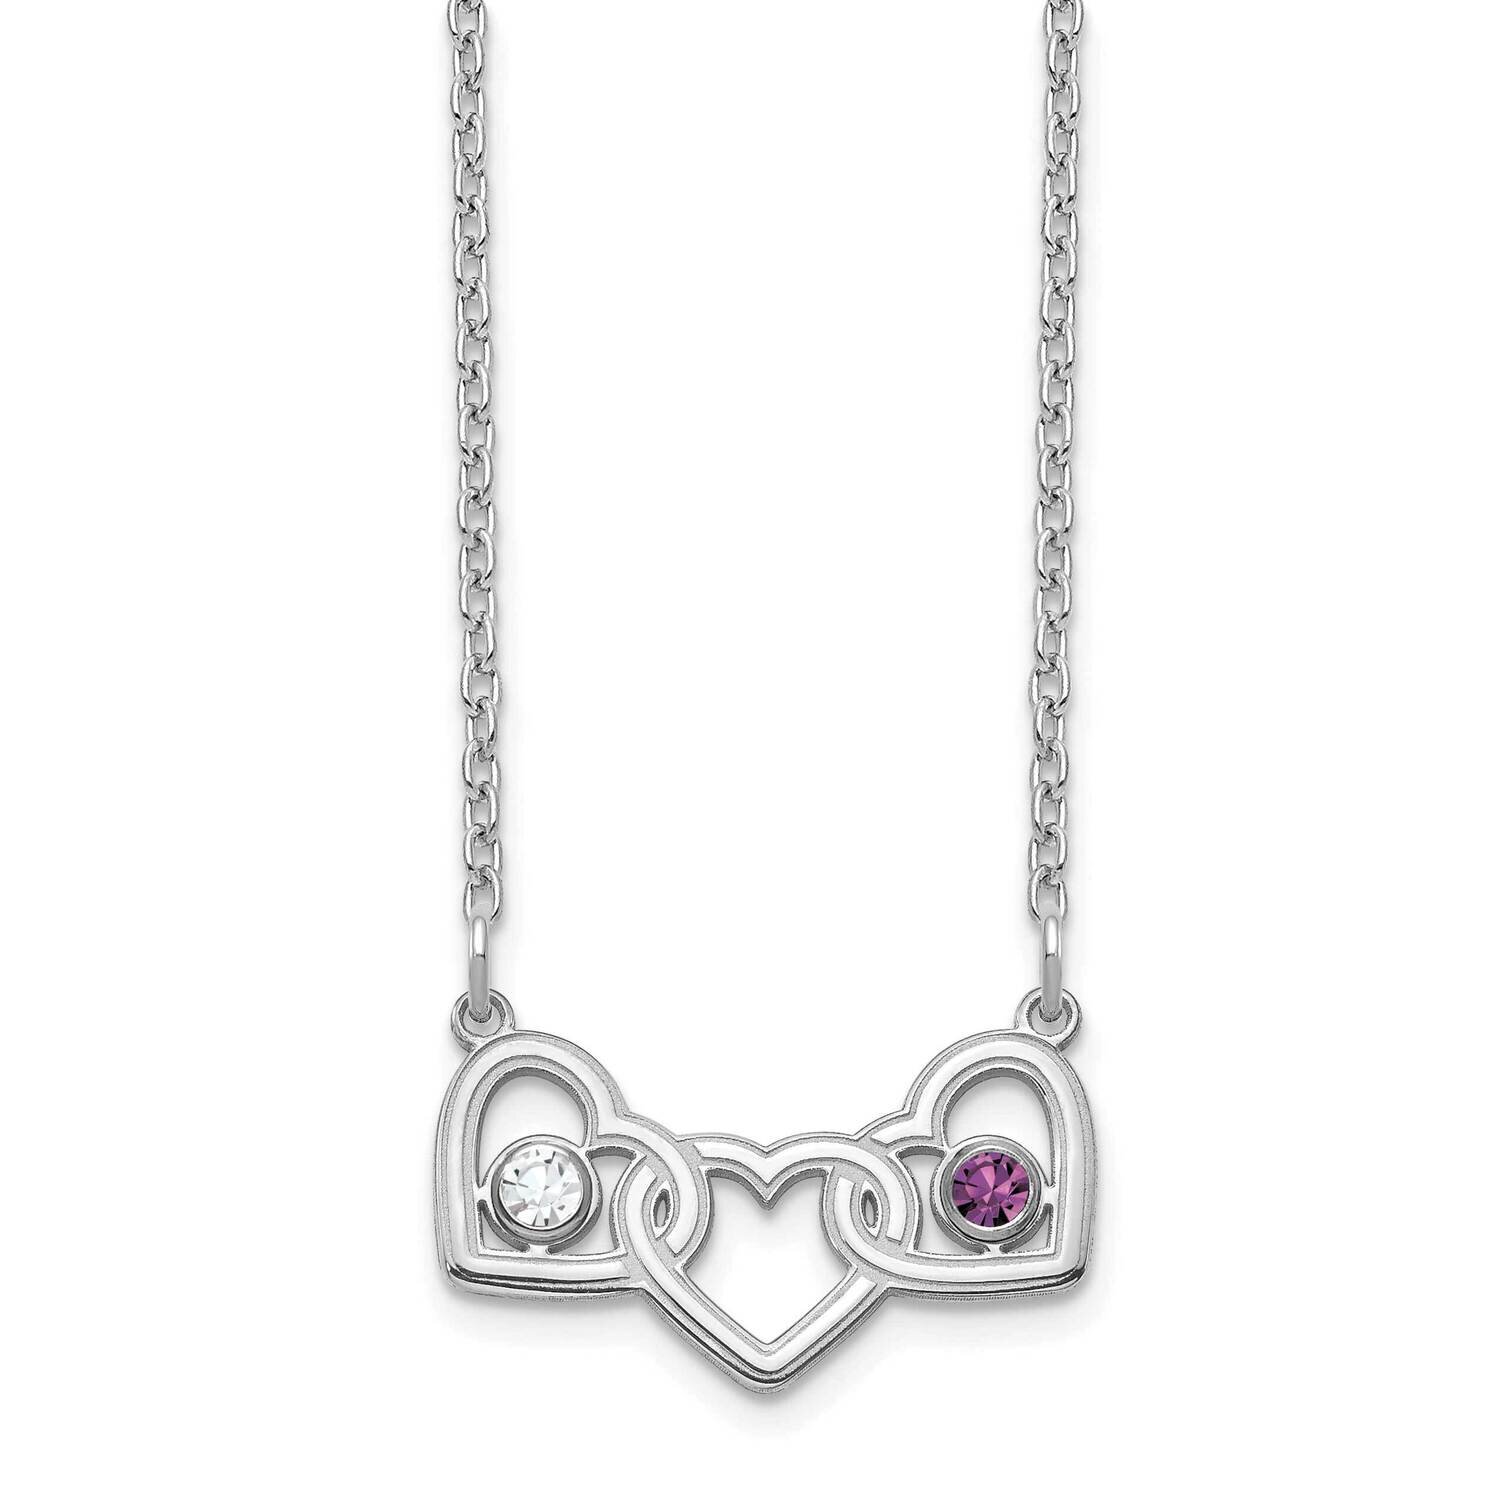 2 Birthstones 3 Heart Necklace Sterling Silver XNA975/2SS